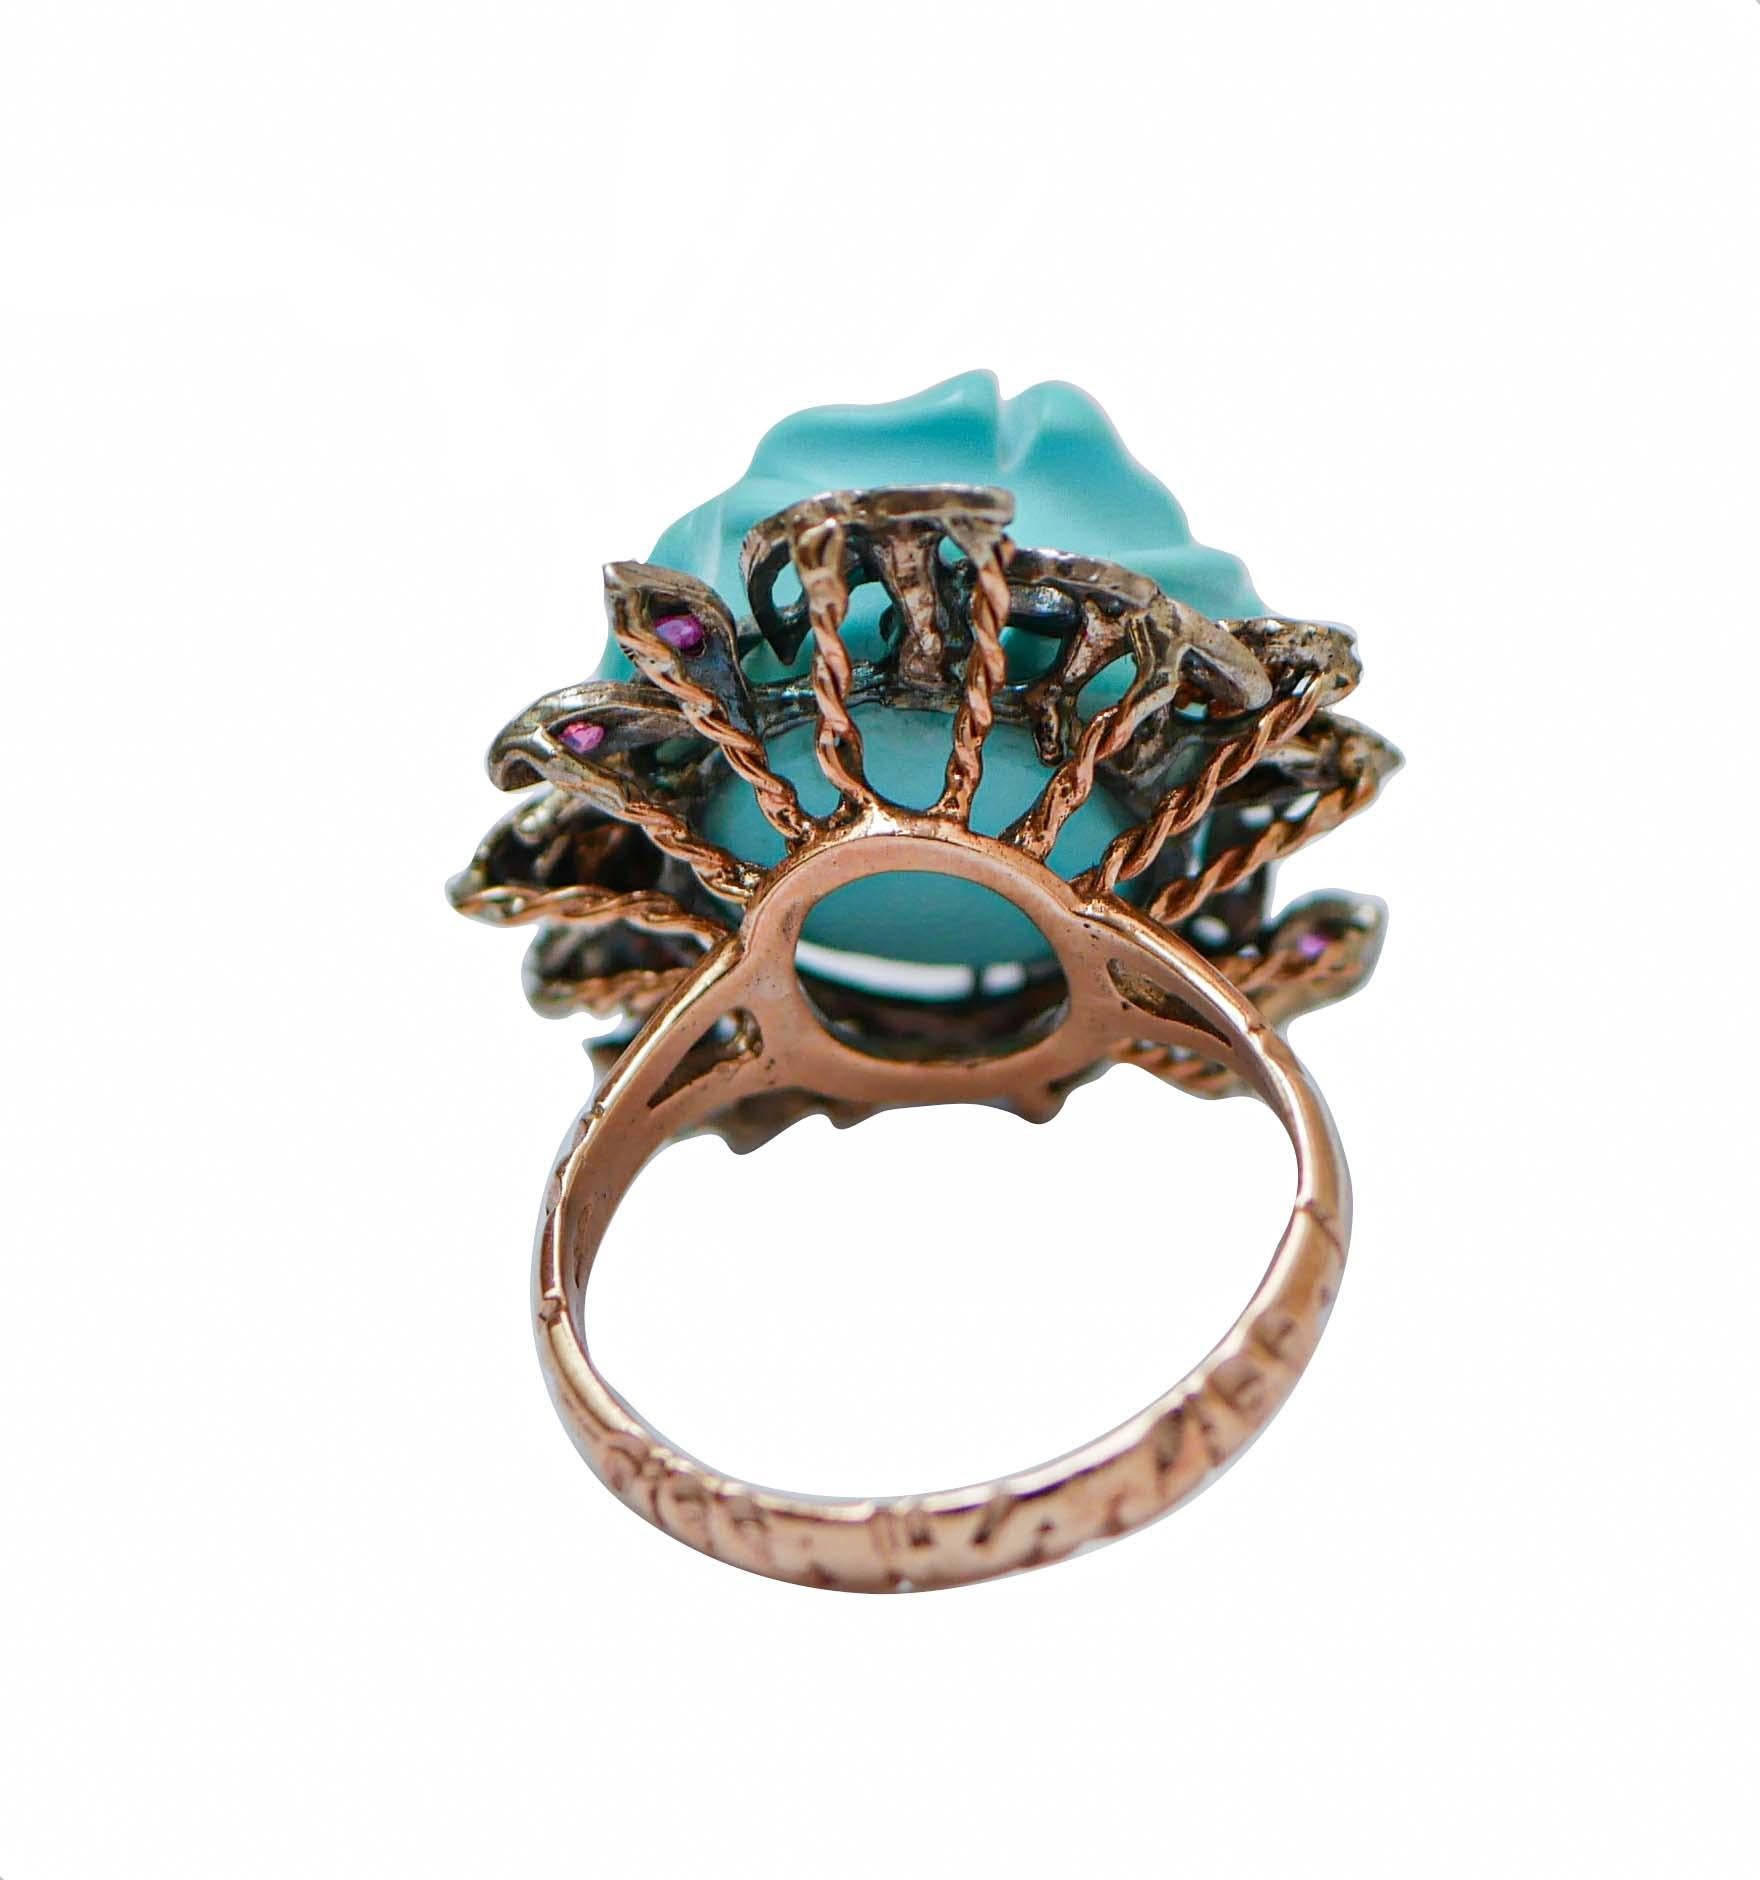 Retro Turquoise, Rubies, Diamonds, Rose Gold and Silver Ring. For Sale